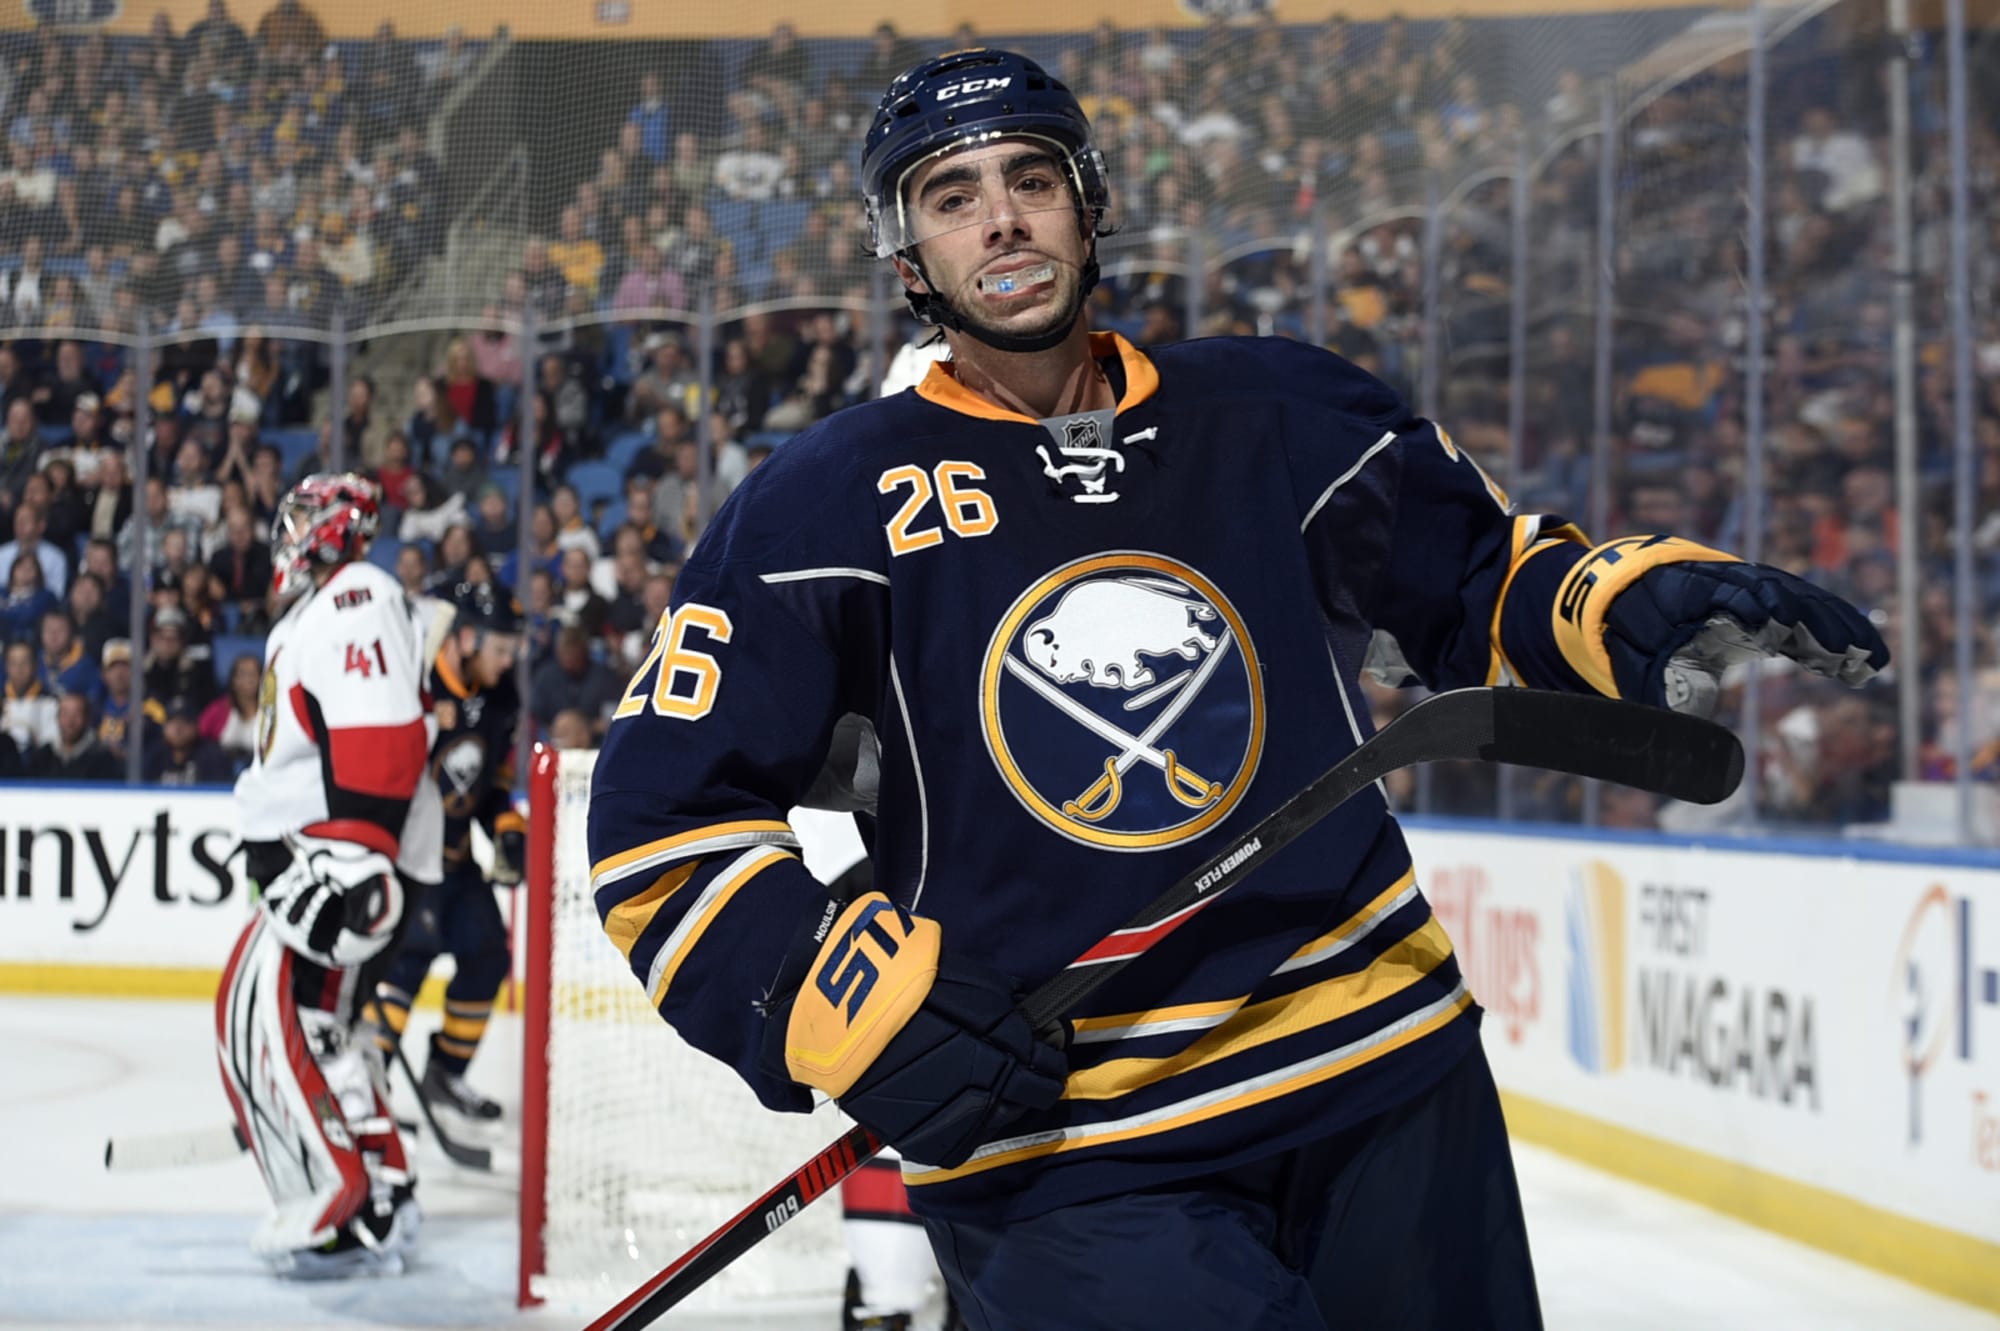 One-on-One With Matt Moulson